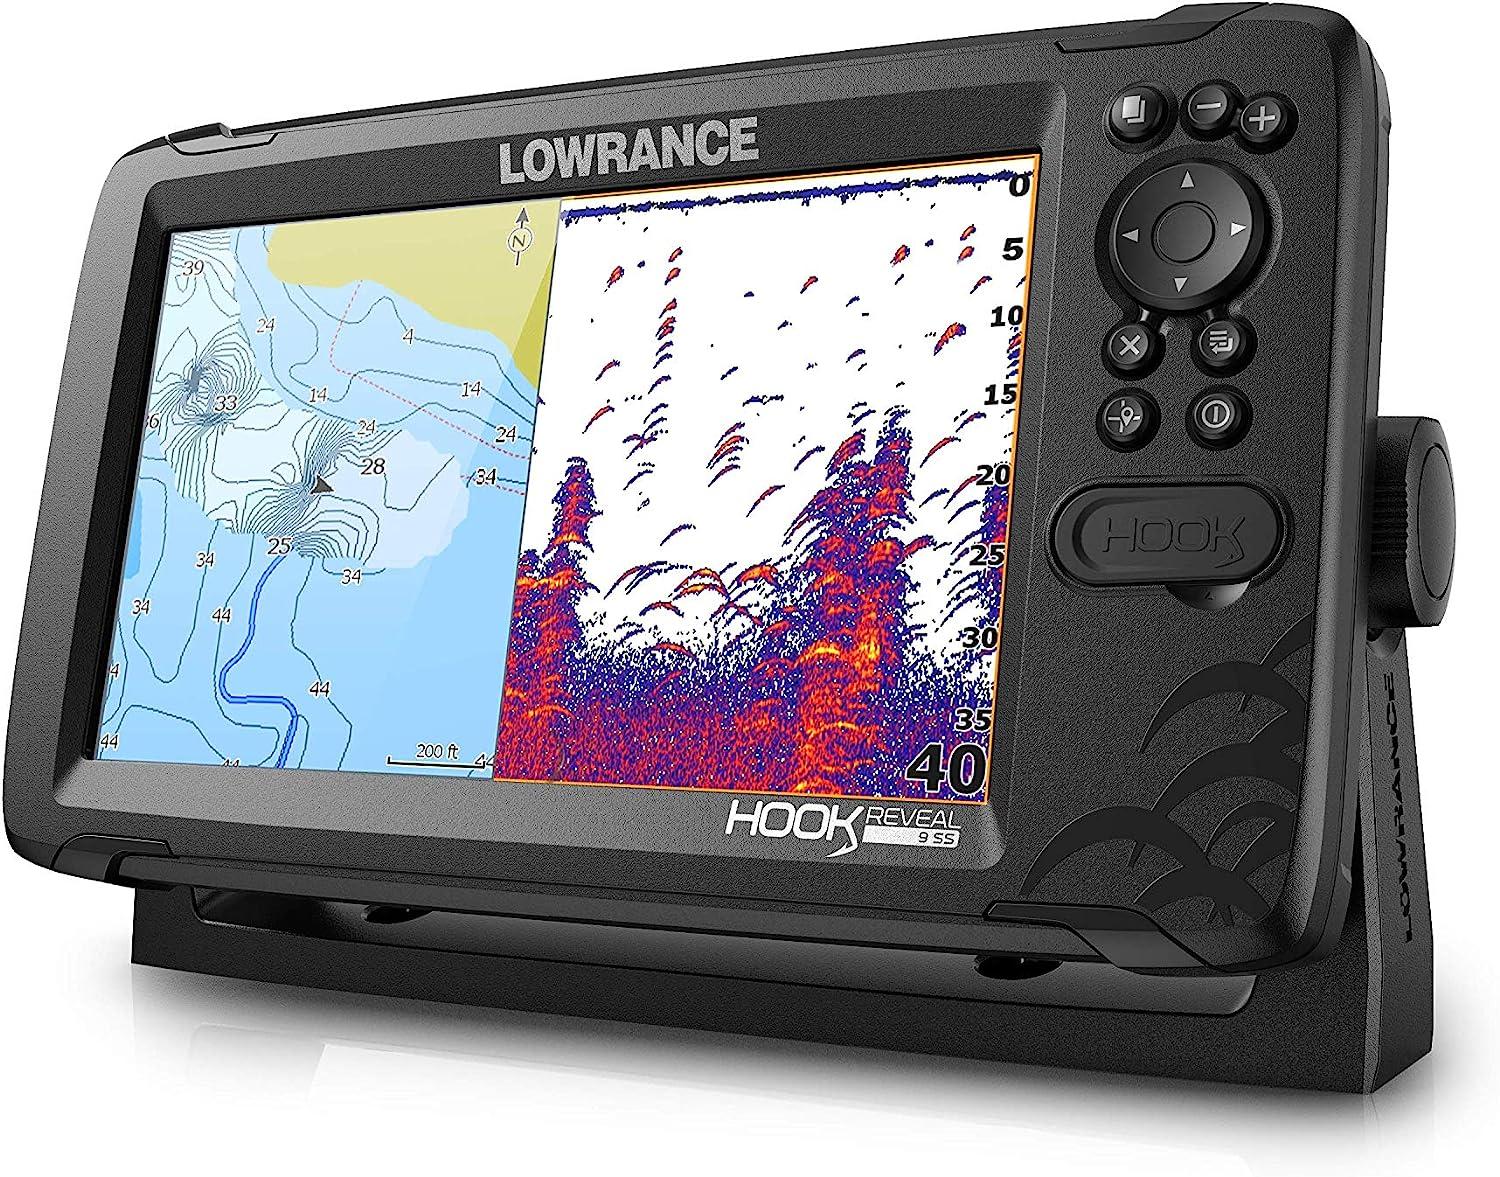 Lowrance Hook Reveal 9 Fish Finder 9 Inch Screen with Transducer and C-MAP  Preloaded Map Options 4000 US Lake Map 9 Inch TripleShot